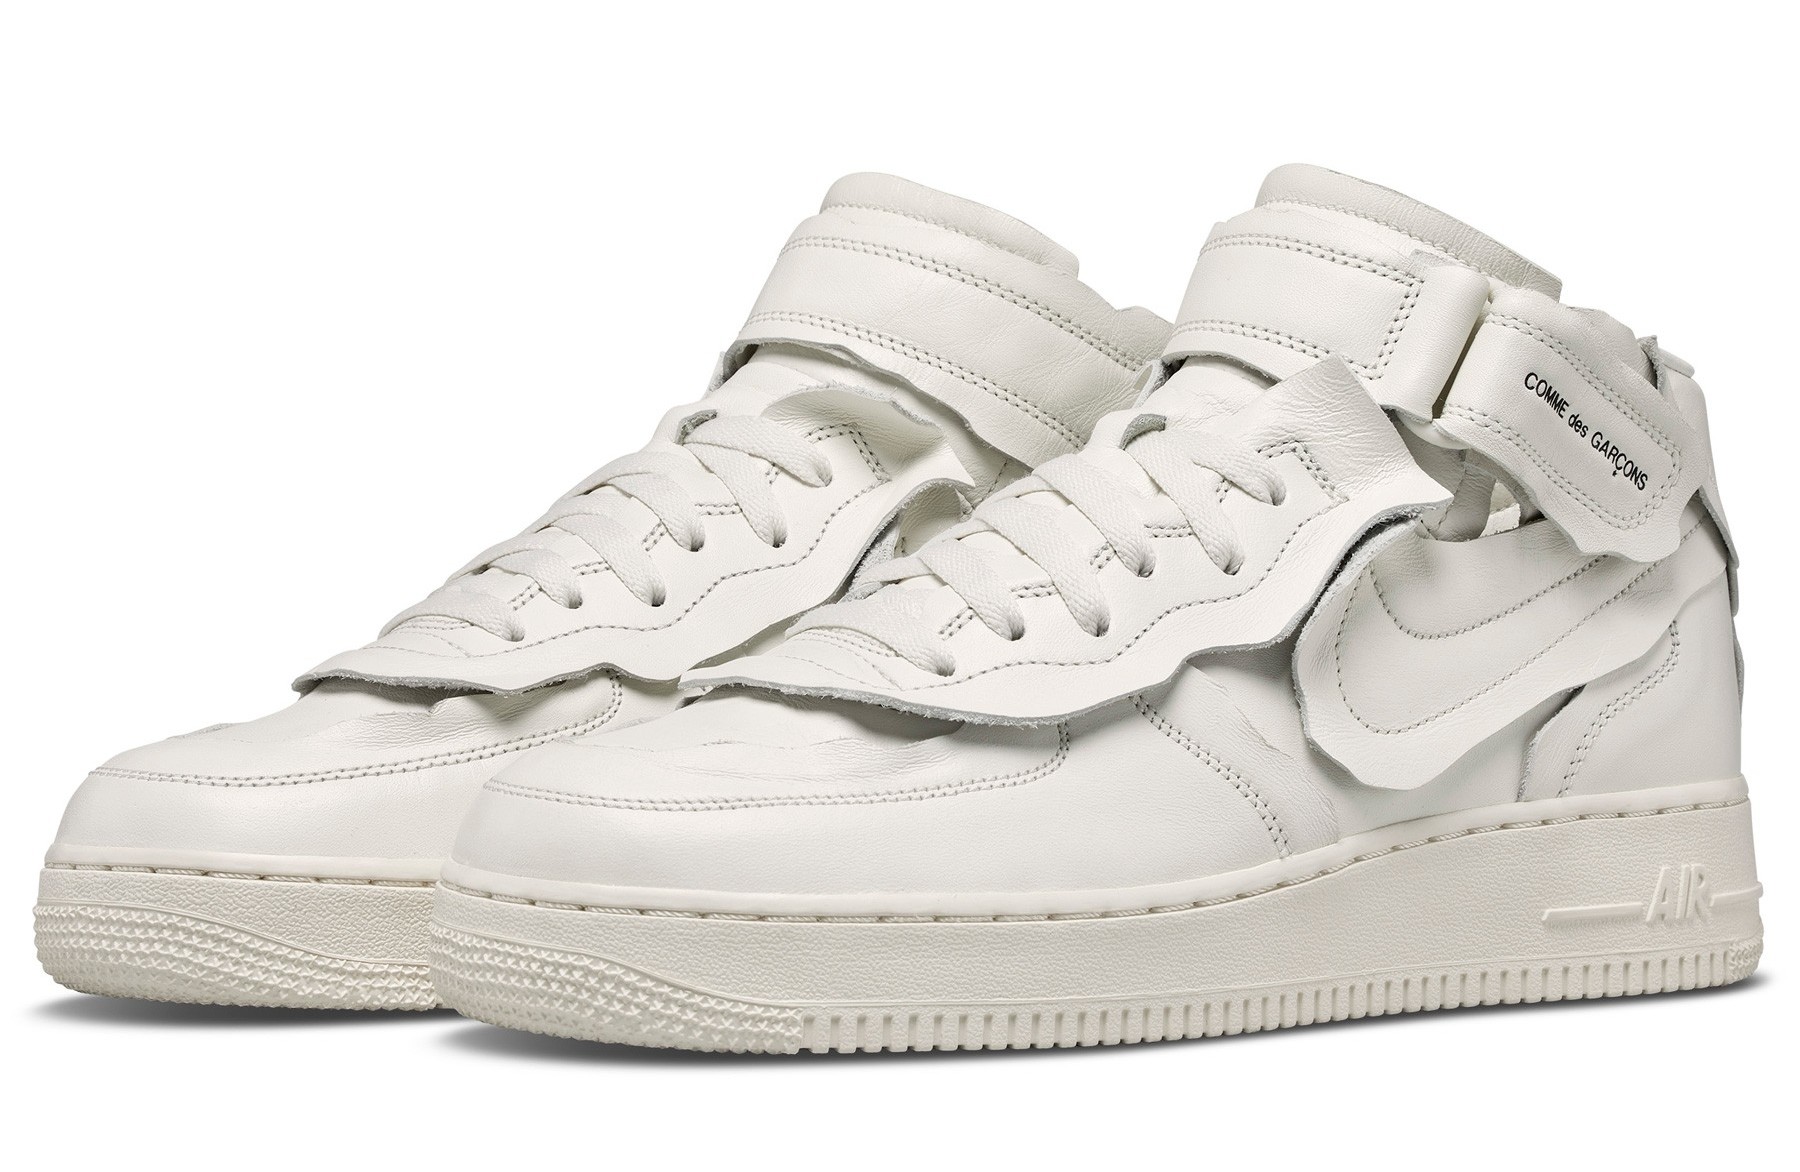 Comme des Garcons' Nike Air Force 1 Mid Collabs Are Dropping